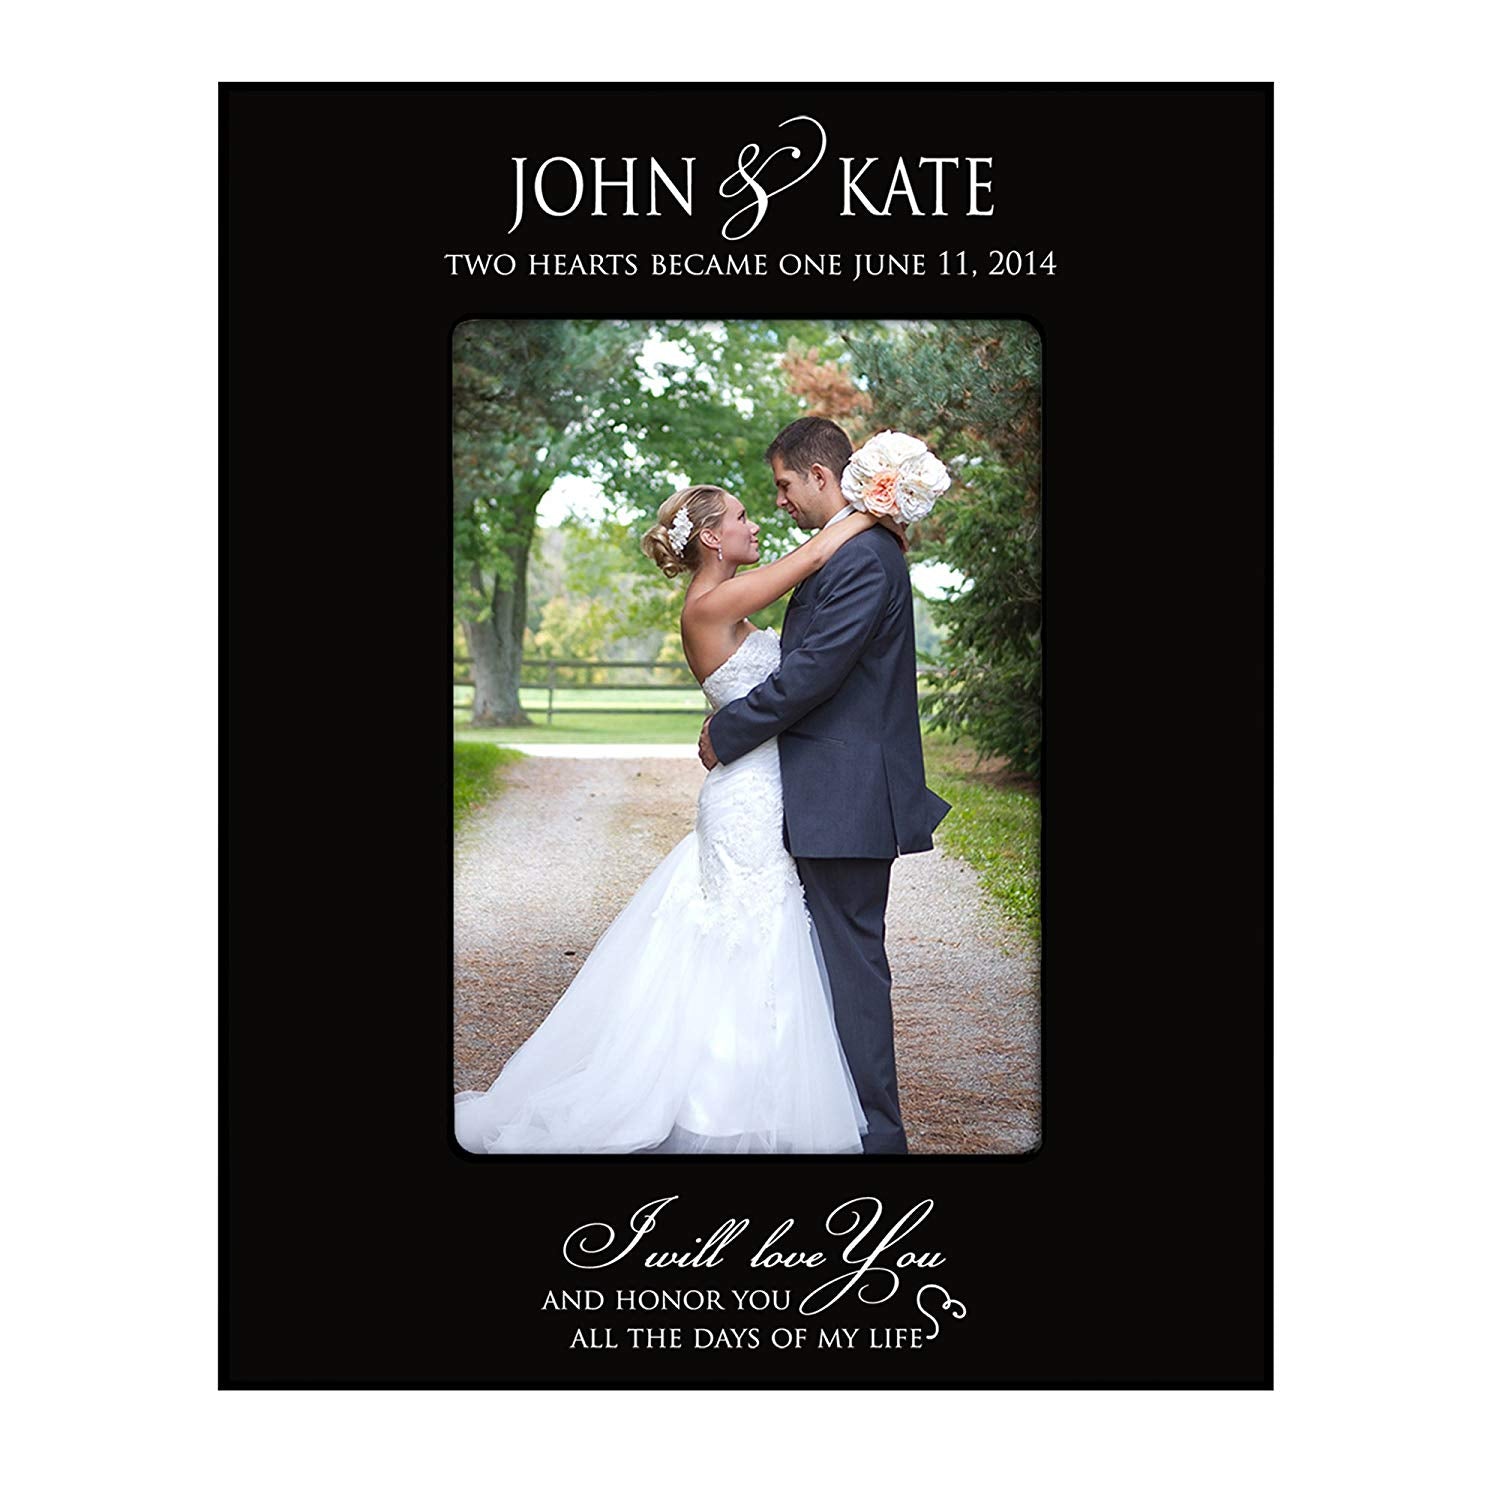 Wedding Photo Frame " Two Hearts Became One " Holds 4x6 Photo